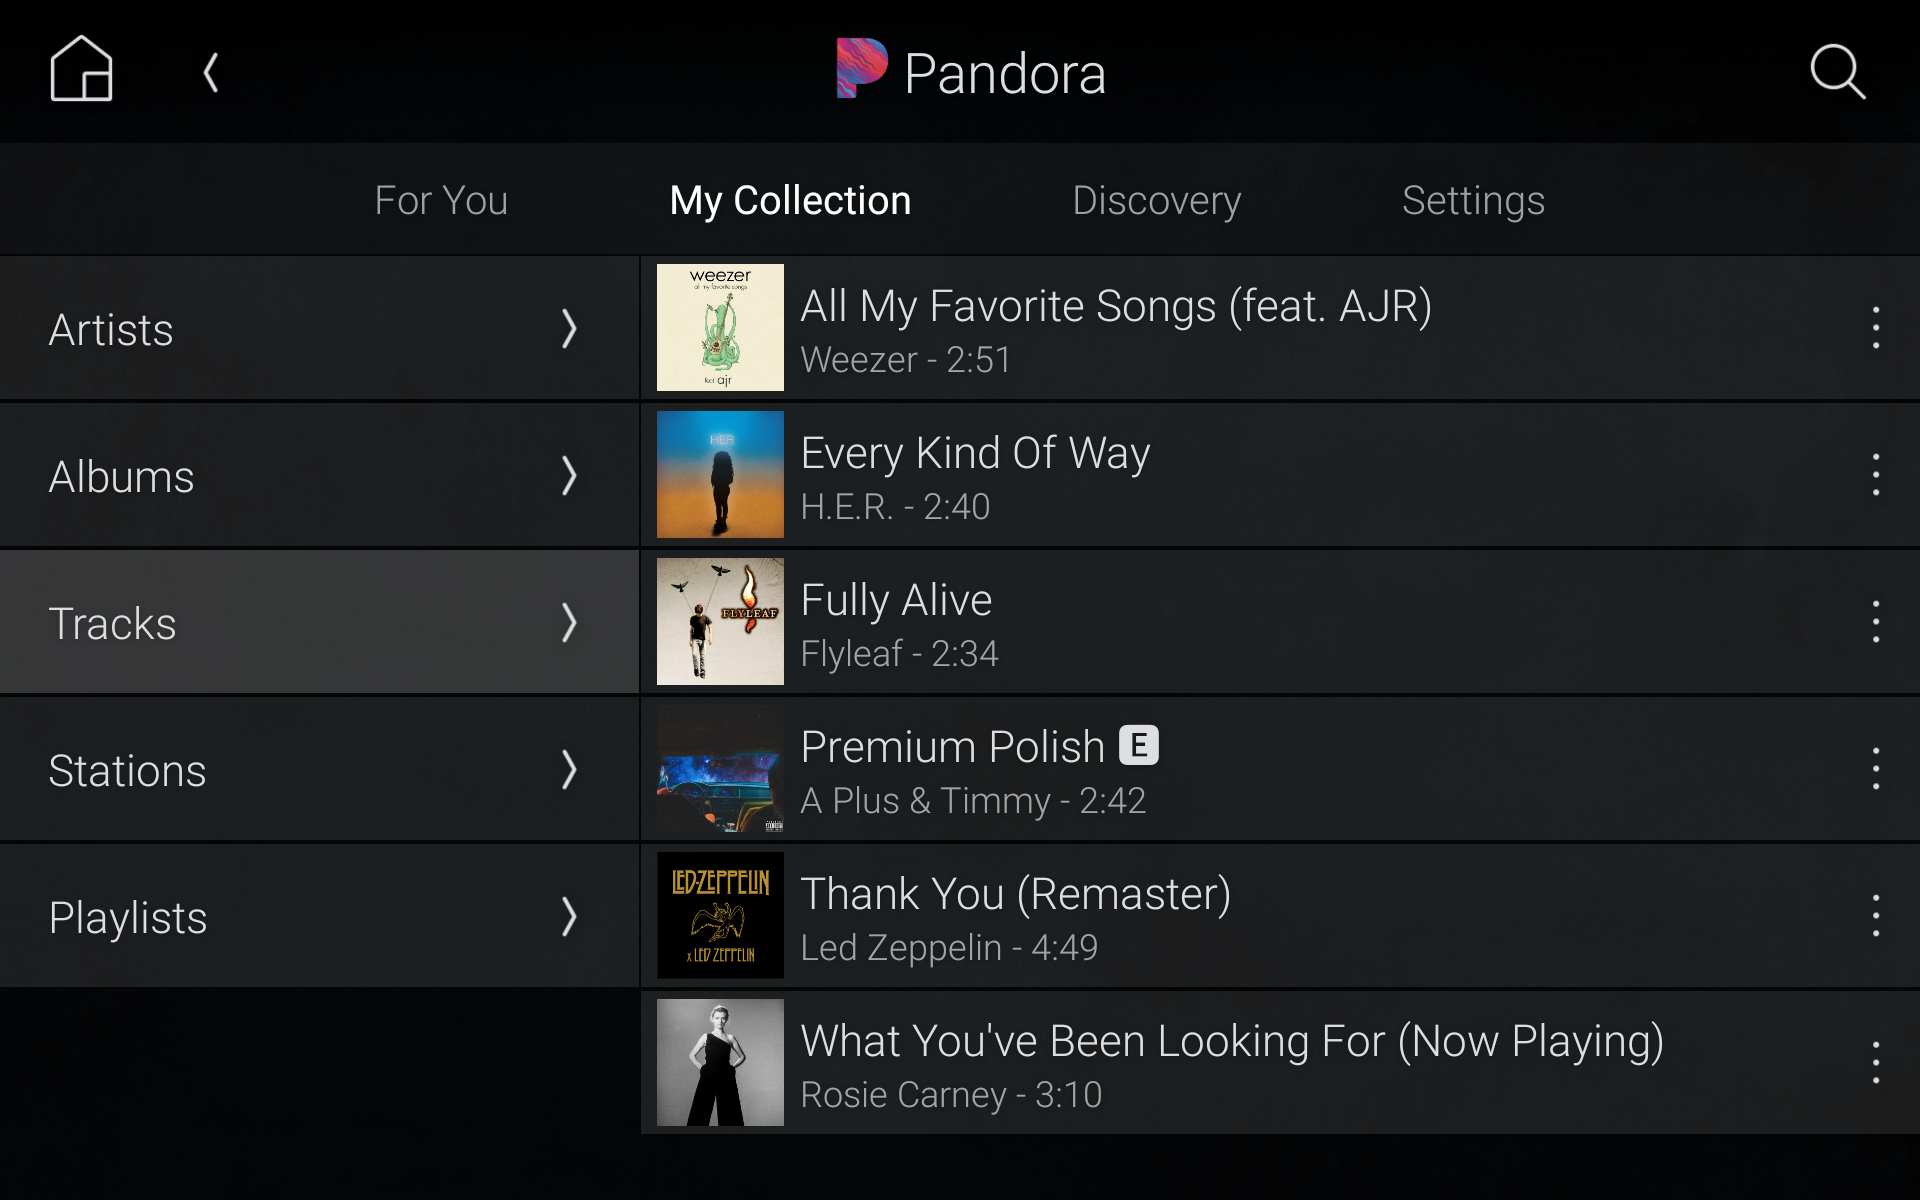 Control4 Adds Full Support for Pandora Music